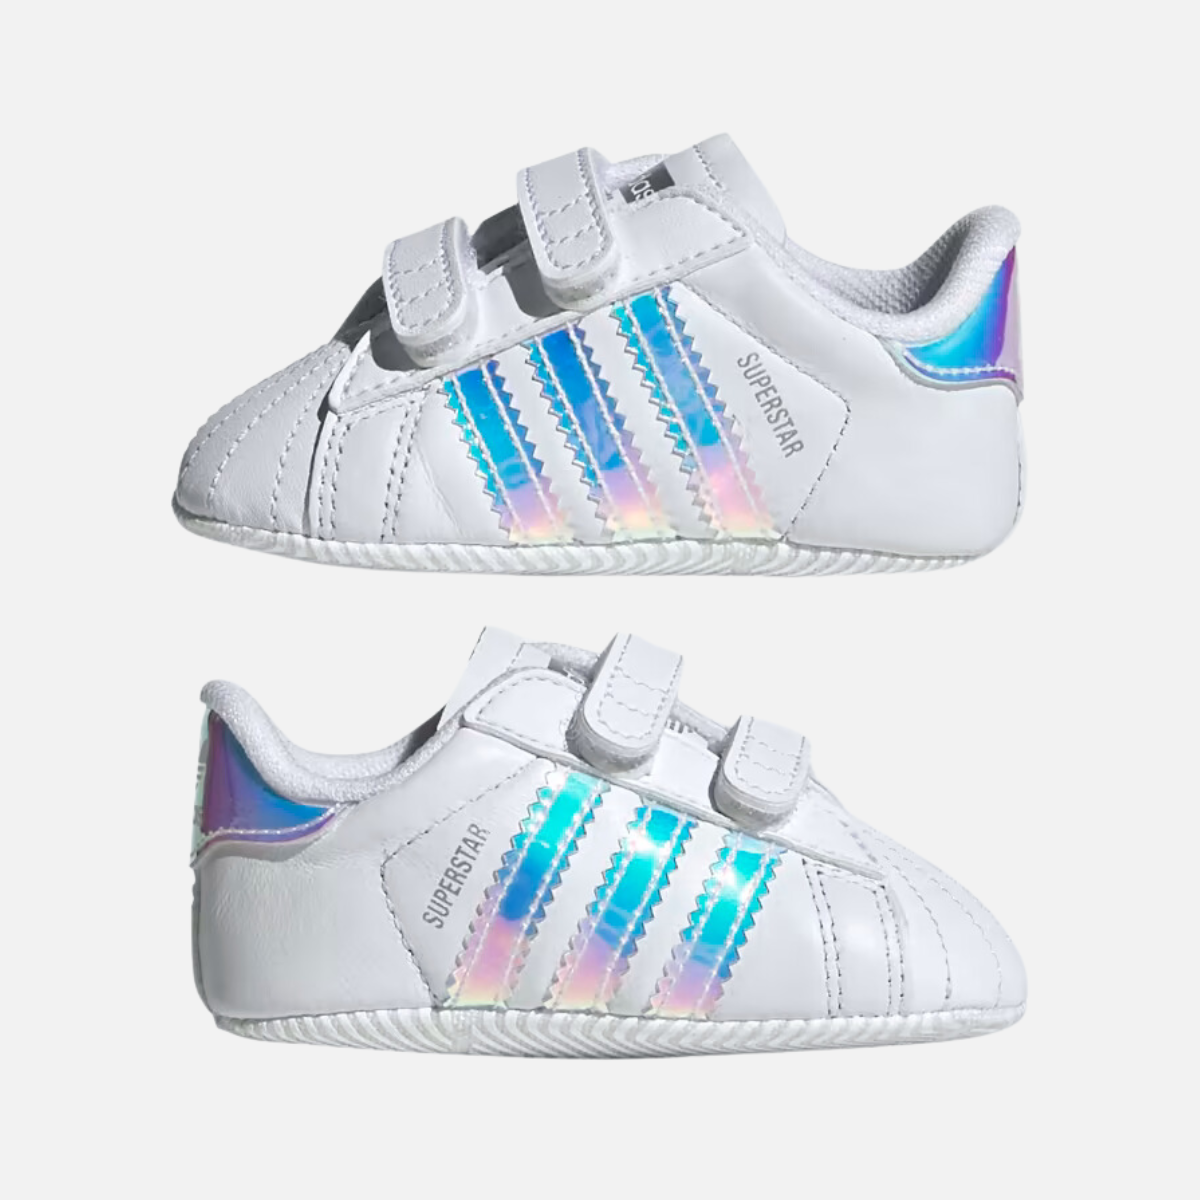 Adidas Superstar Unisex Kids Shoes Boys and Girls (0-3 year) -Cloud White/ Cloud White/Core Black